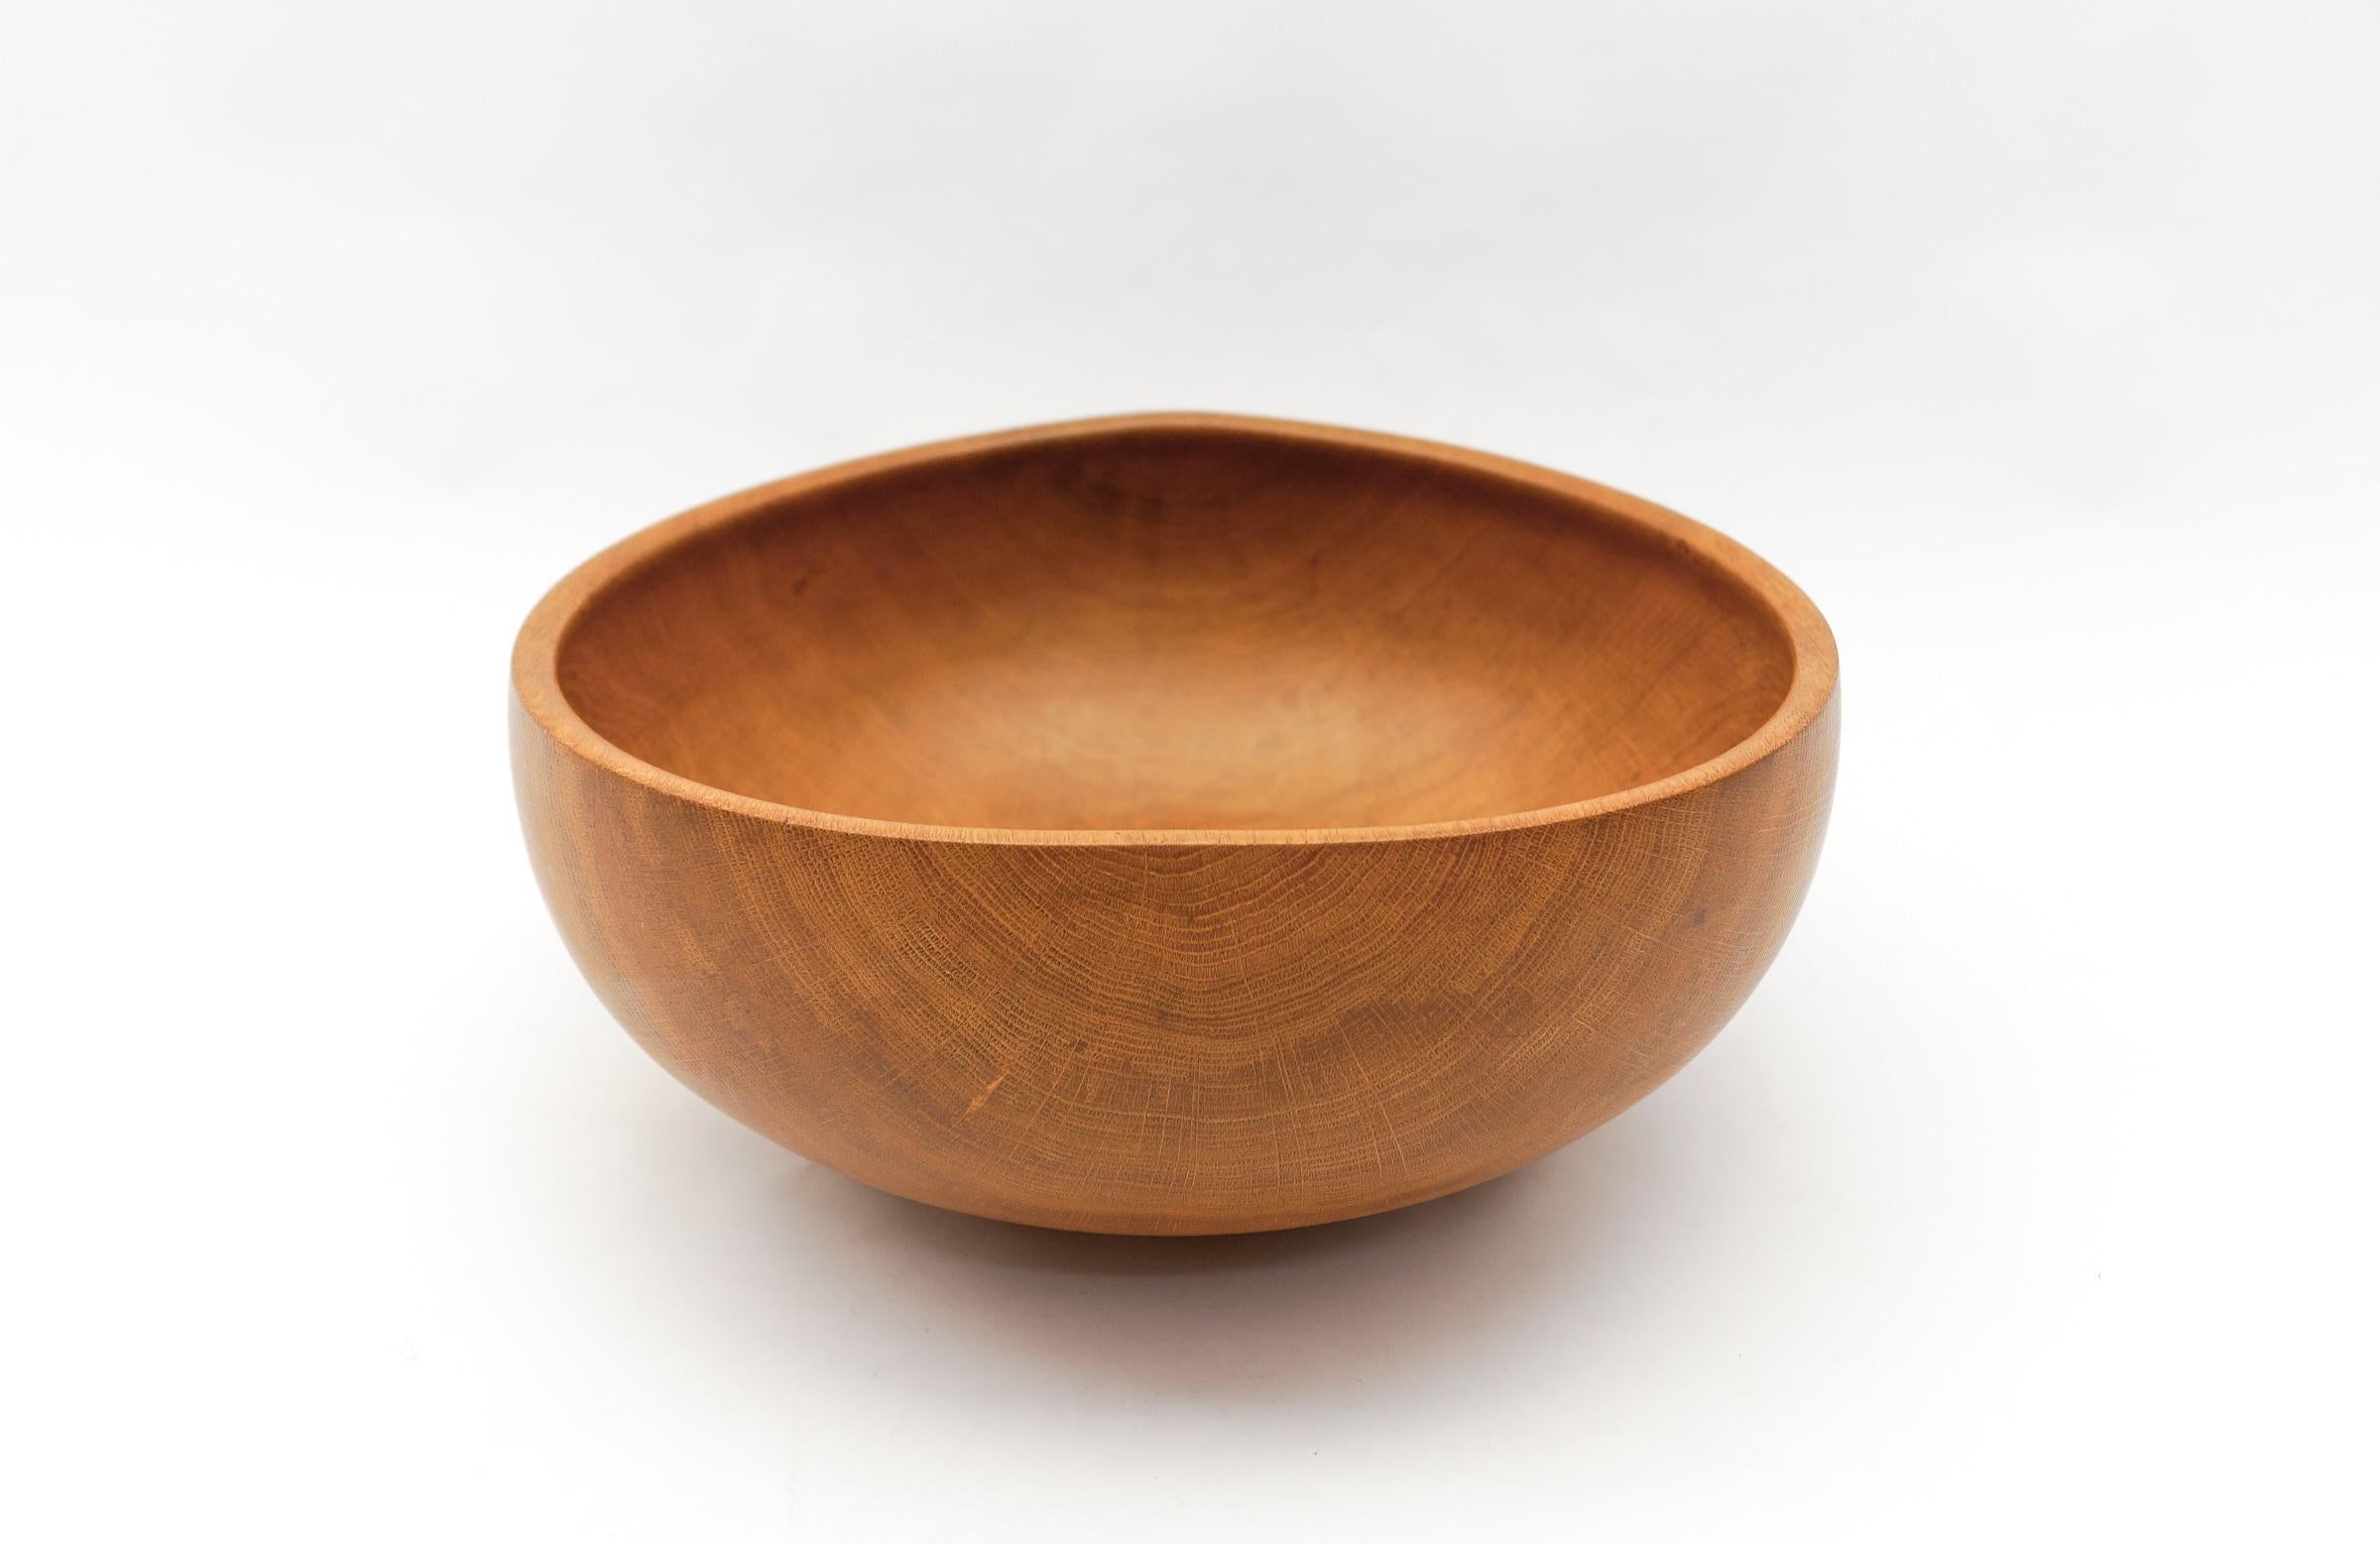 Awesome Huge Mid-Century Modern Oak Bowl by K. Weichselbaum, 1999 Germany For Sale 4